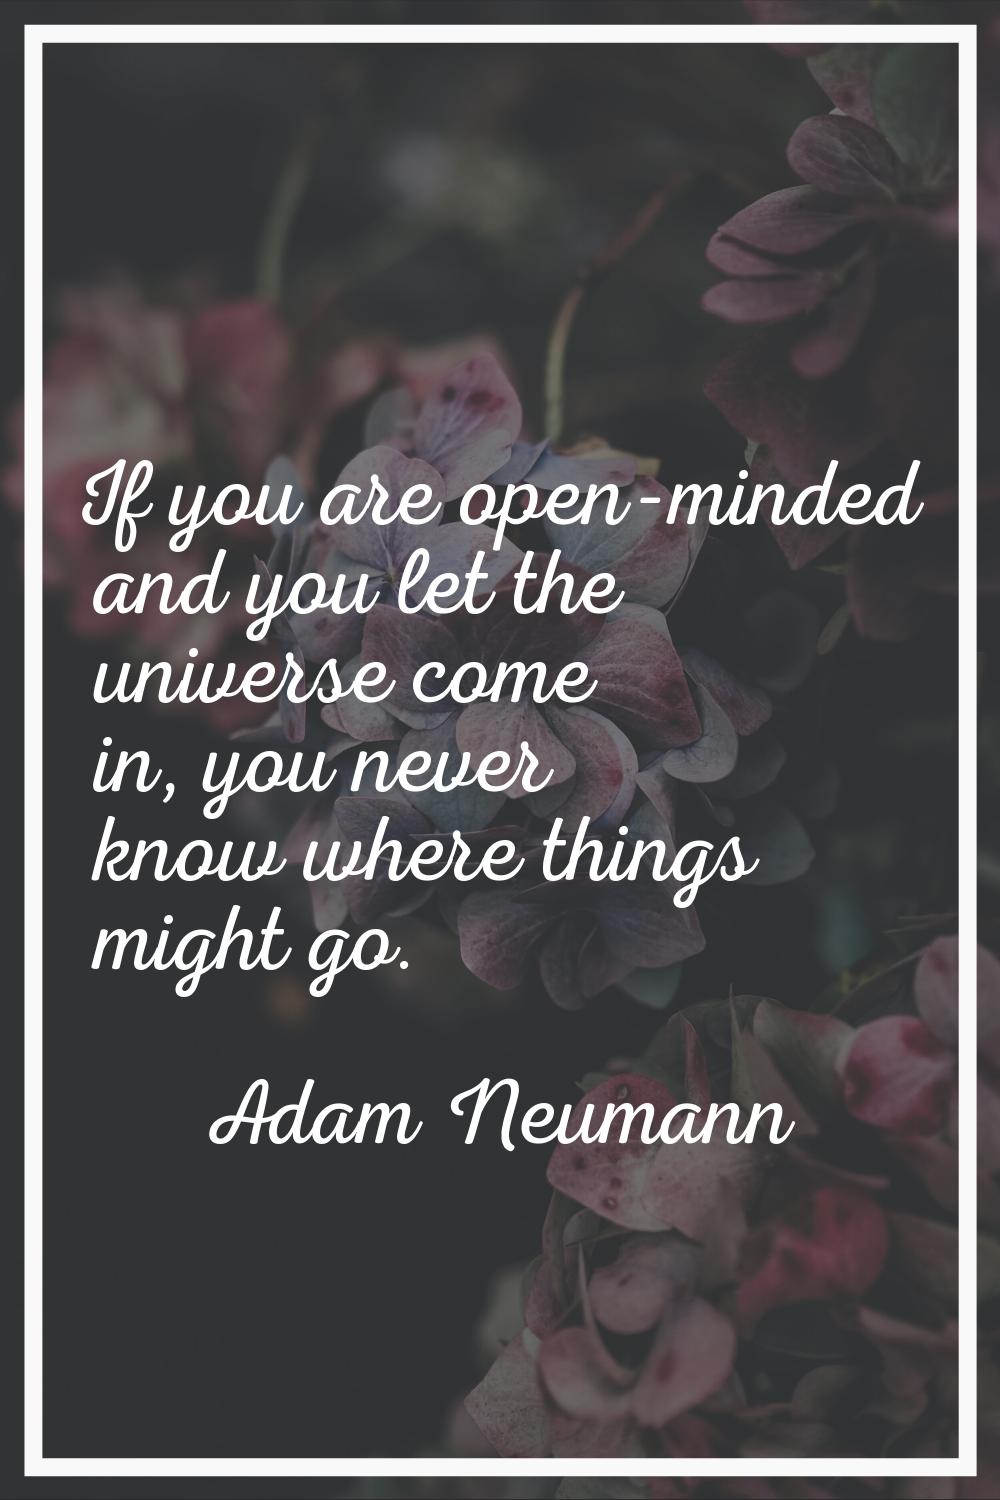 If you are open-minded and you let the universe come in, you never know where things might go.